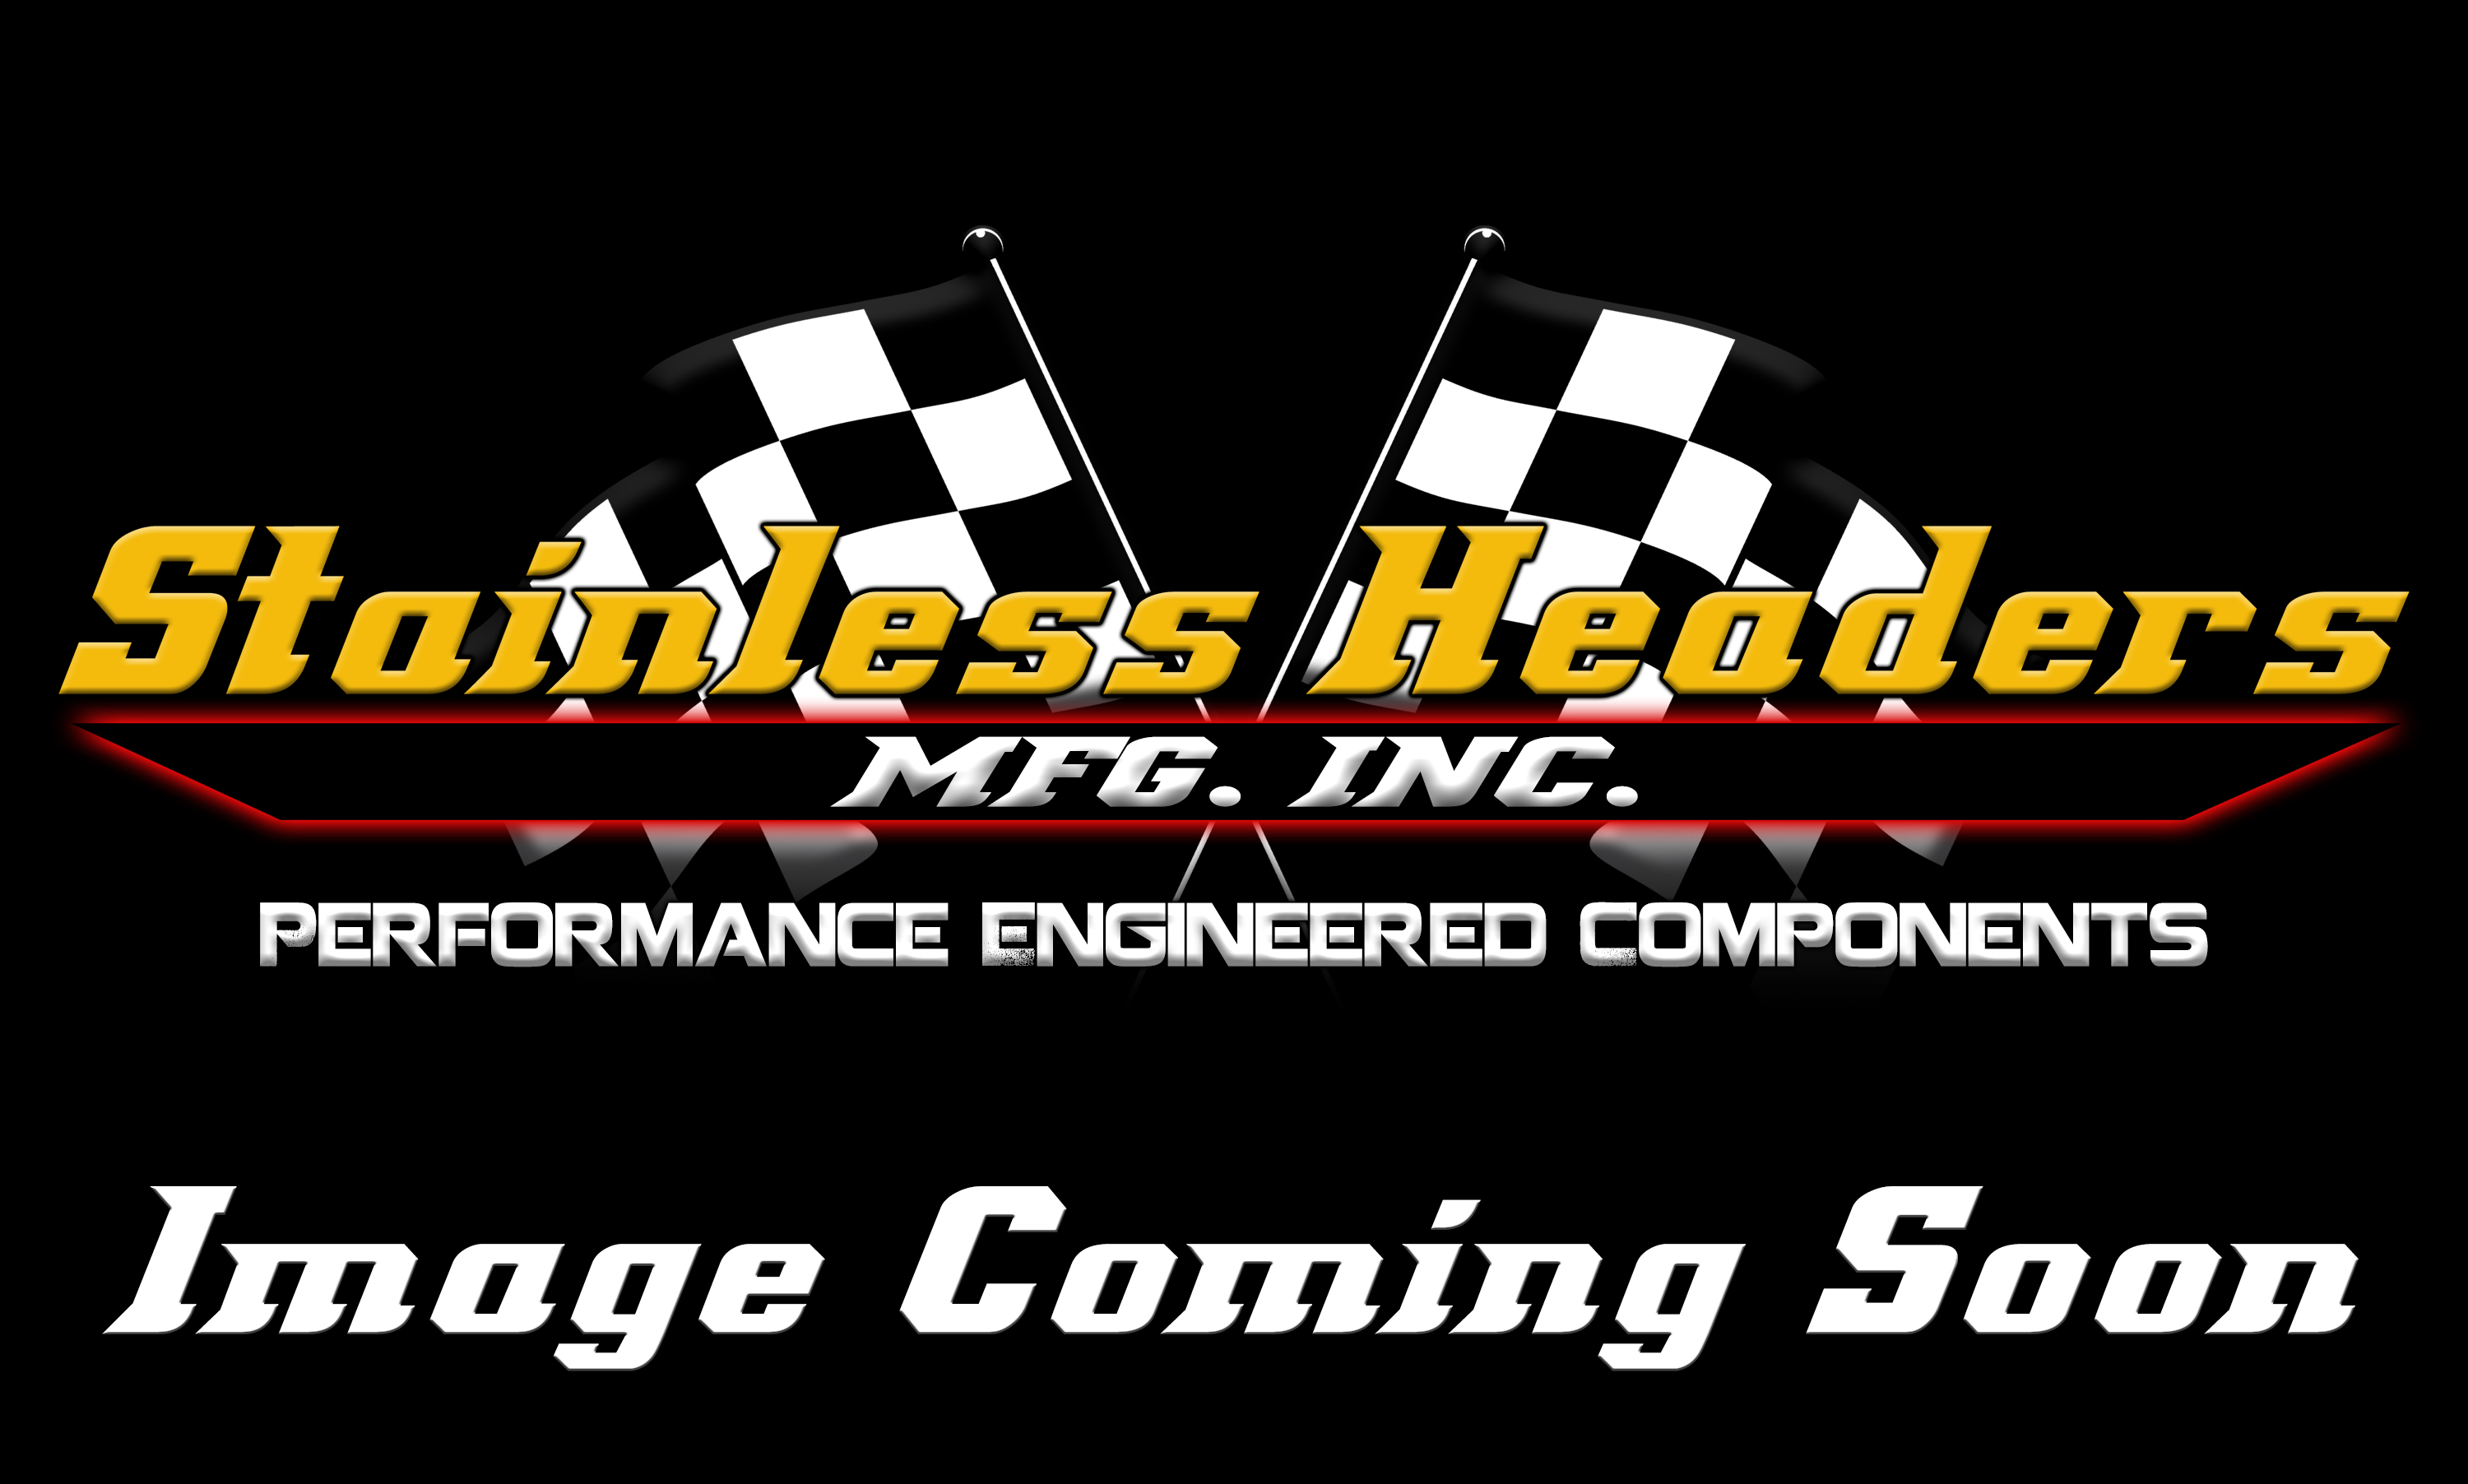 Stainless Headers - 2 3/8" Primary 4 into 1 Performance Merge Collector-16ga 321ss